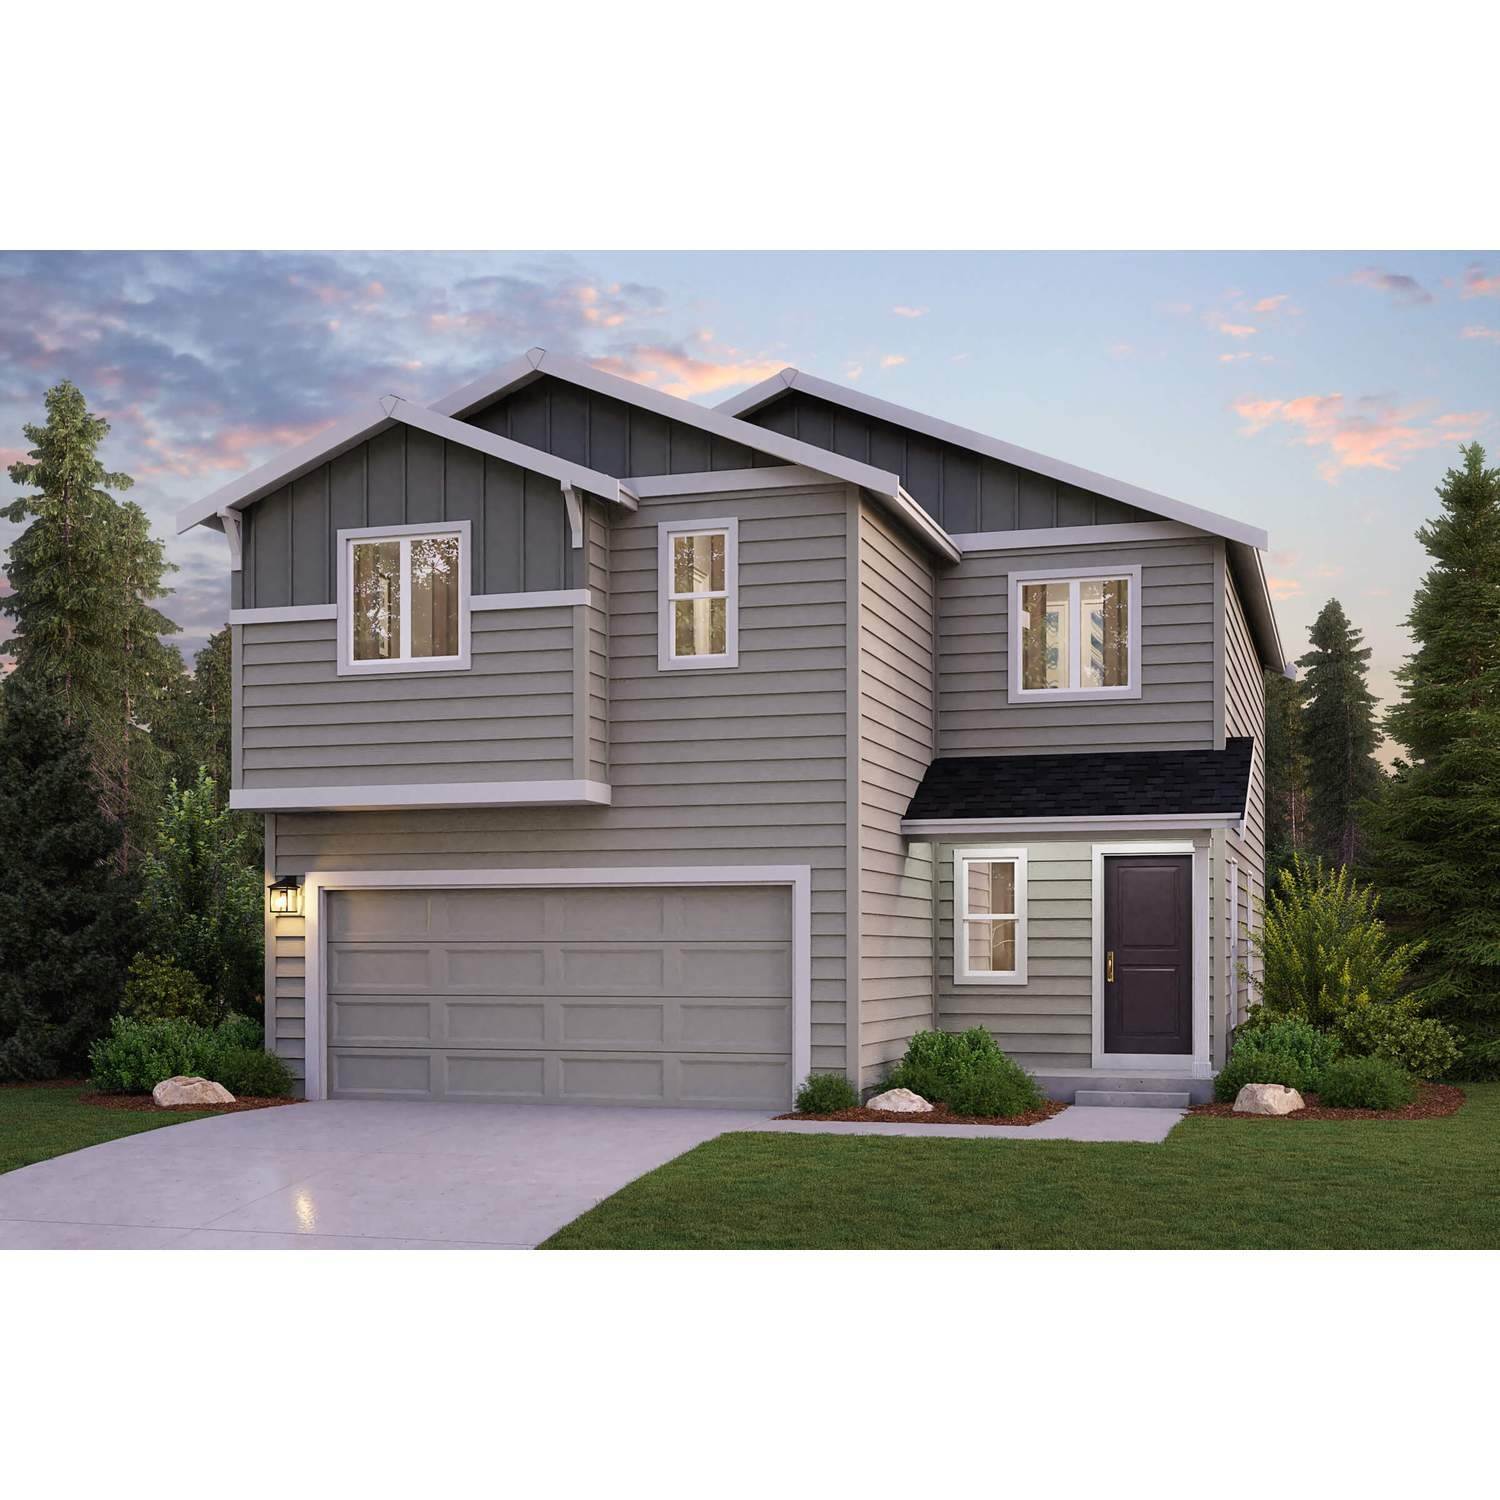 Single Family for Sale at Yelm, WA 98597